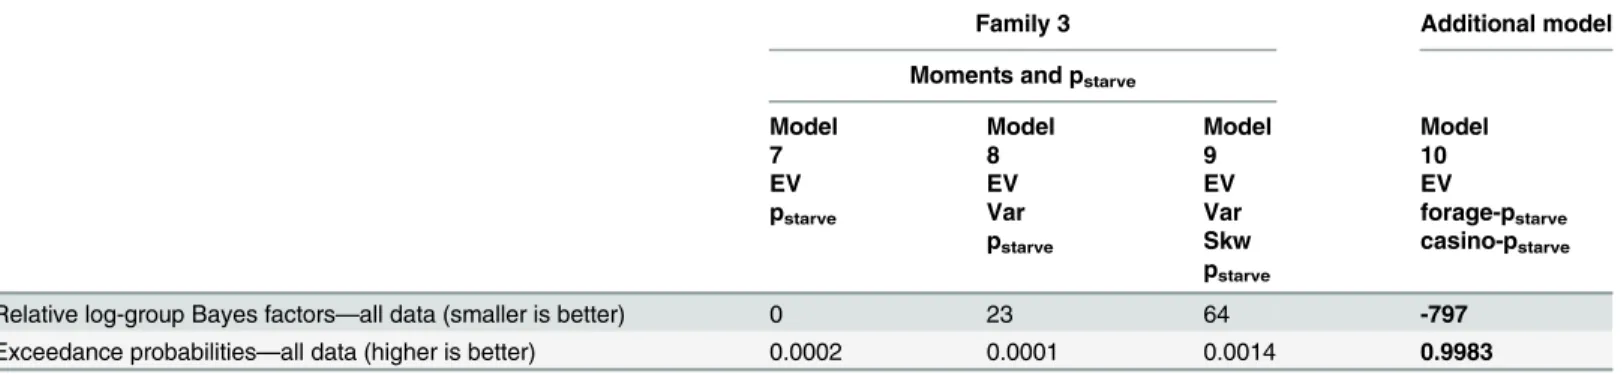 Table 5. Comparison of an additional model including frame-specific parameters: Relative log-group Bayes factors and exceedance probabilities.